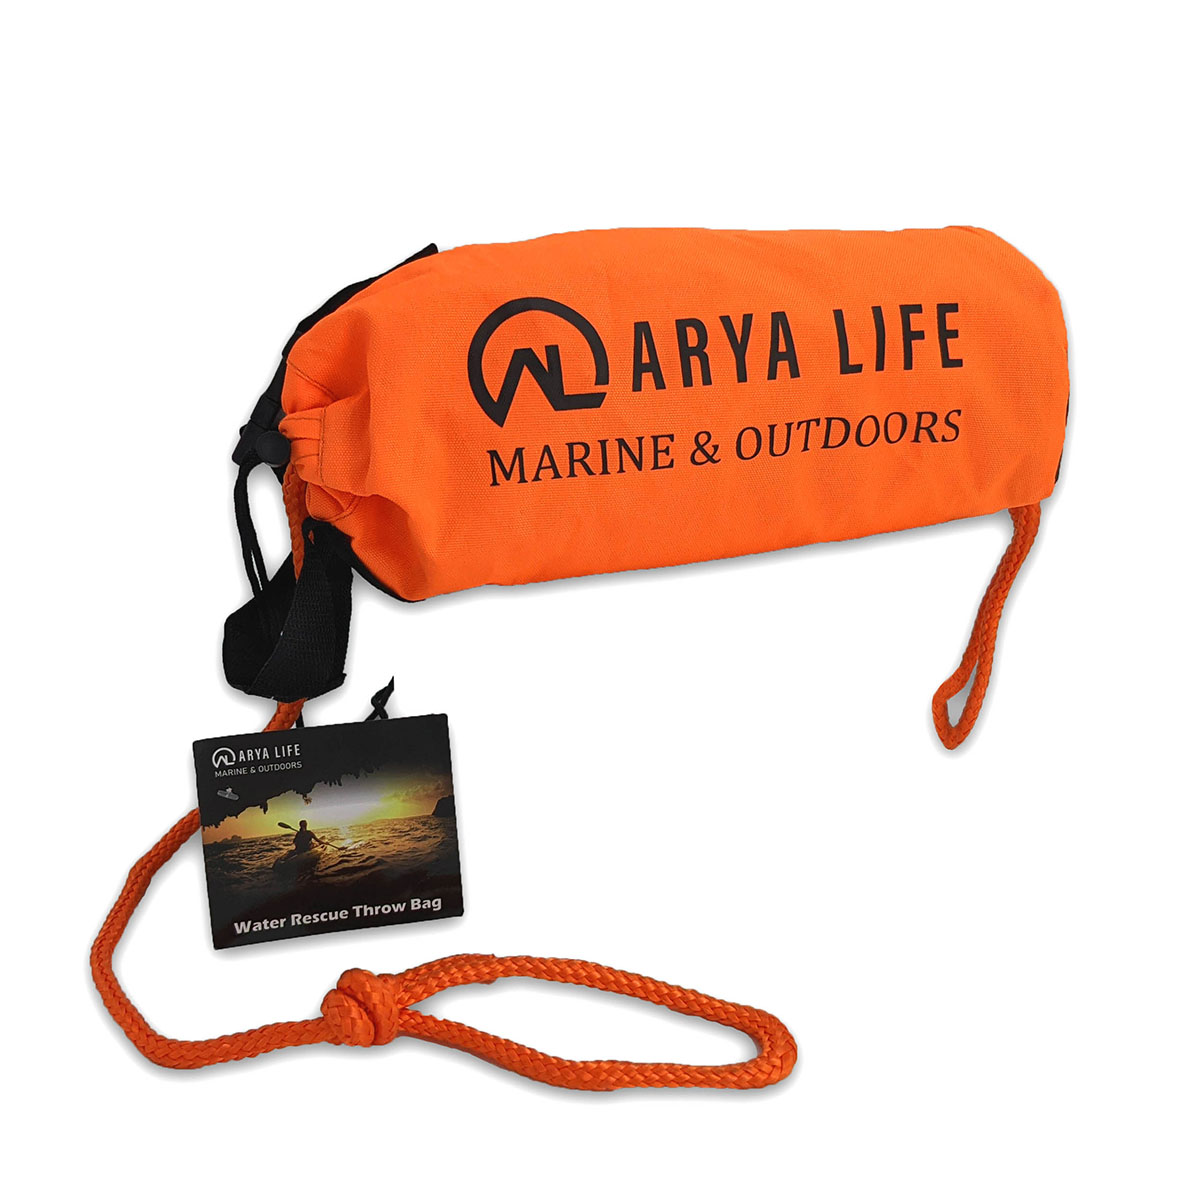 Arya Life Throw Rope Rescue Bag with 70ft of Marine Rope